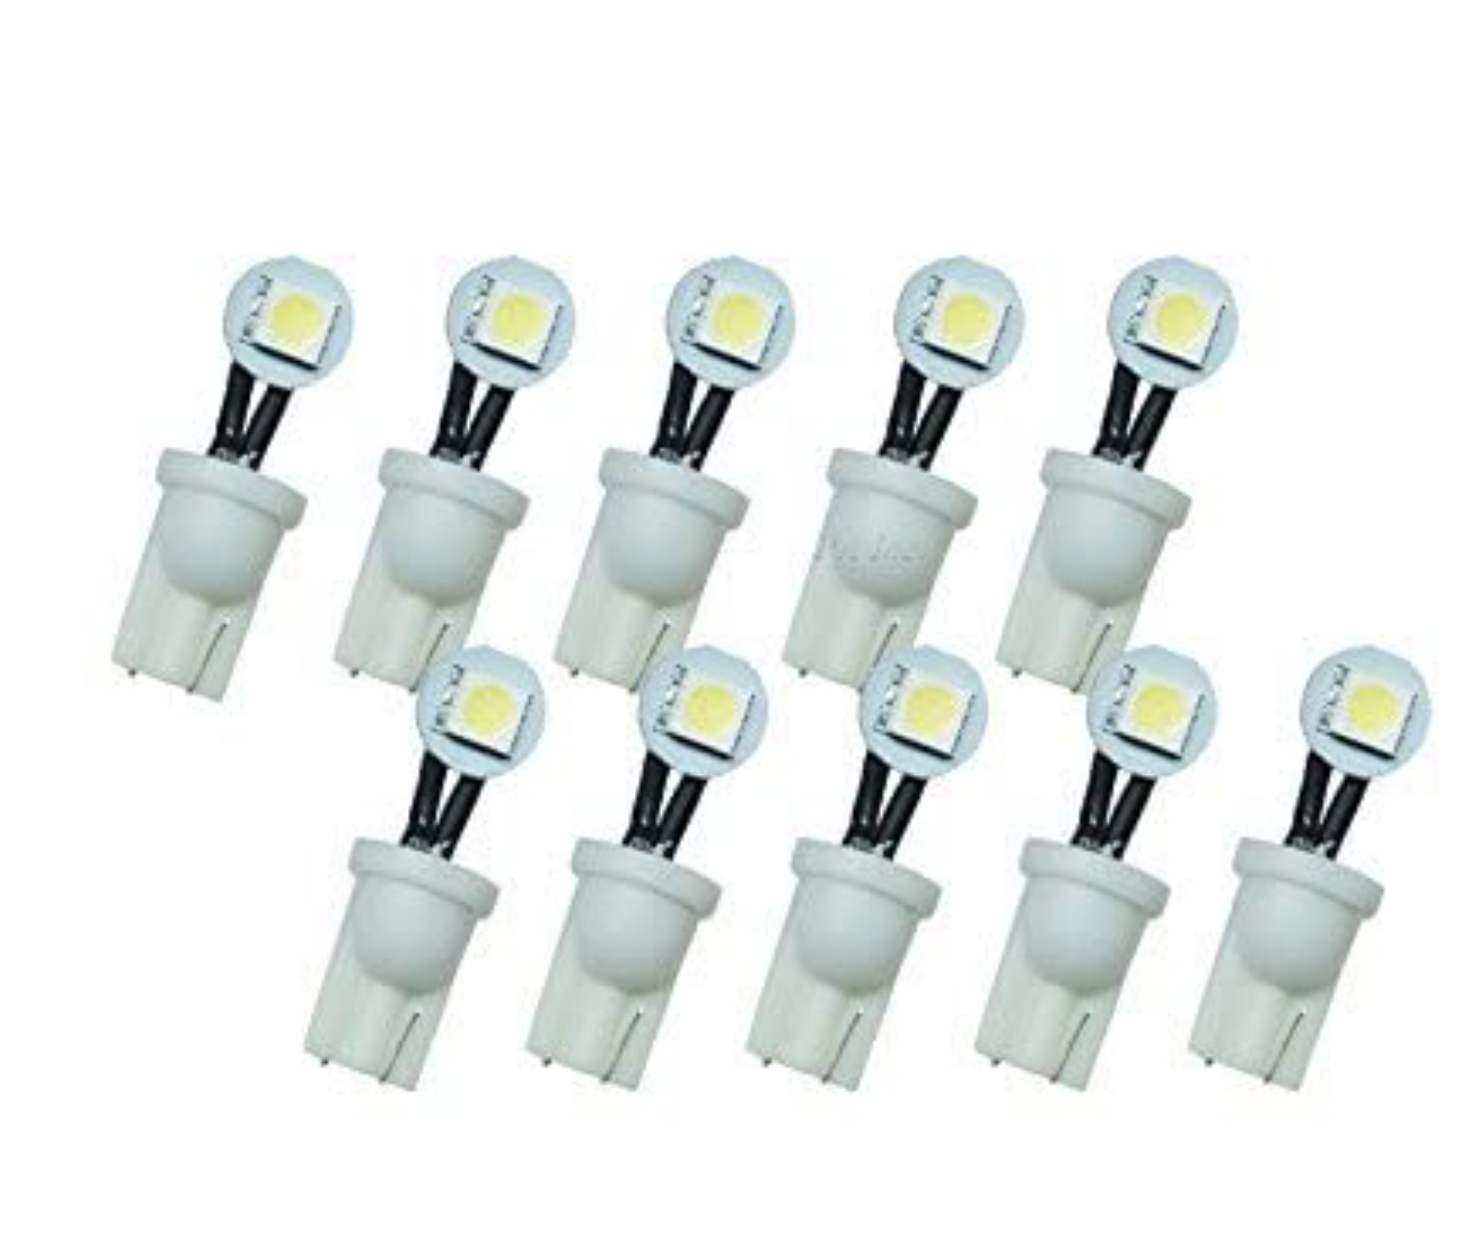 RetroArcade.us ra-pb-led-t10-y-cc-10pk 10 Pack Pinball Replacement Bulb led 6.3 Volt ac 555 Clear Wedge Base t10 Yellow concave 